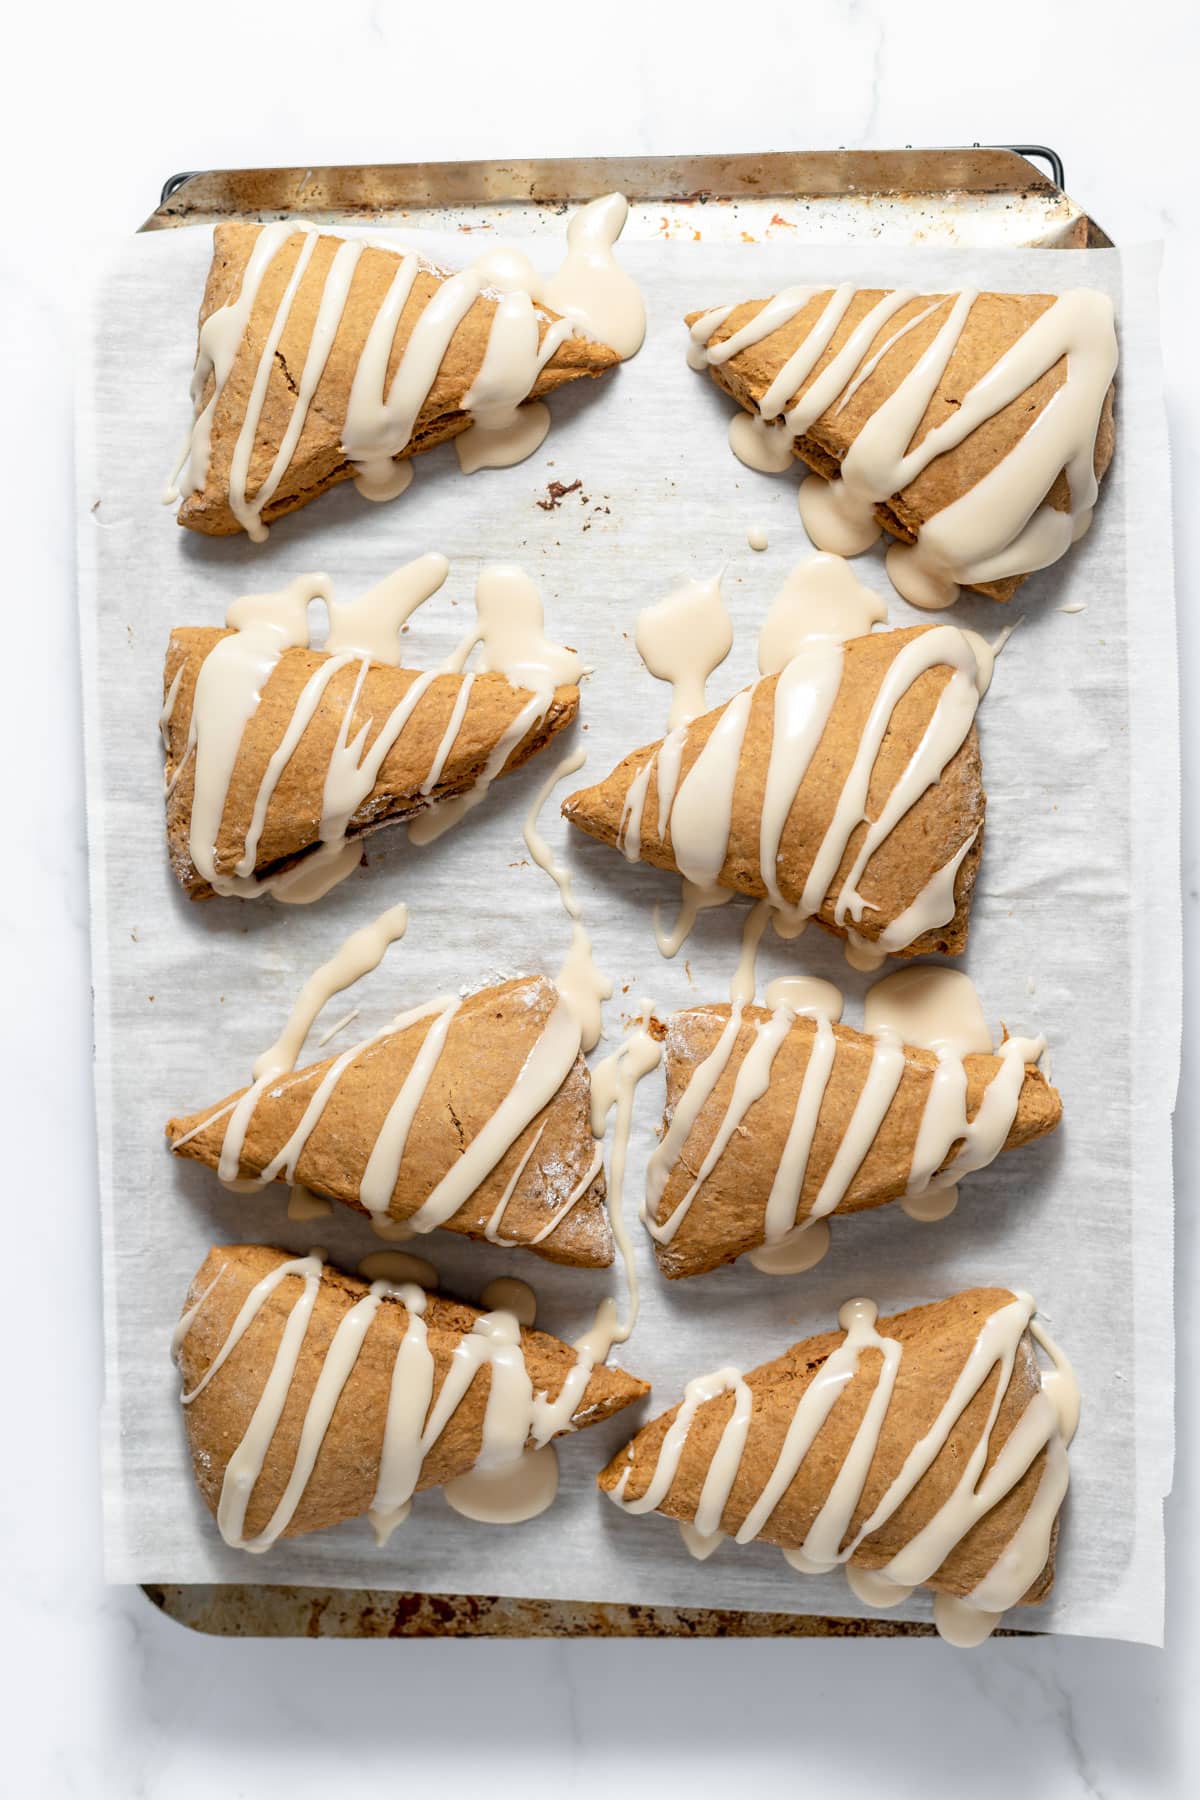 Eight gingerbread scones drizzled with maple glaze on a parchment lined baking sheet that have been baked in the oven.